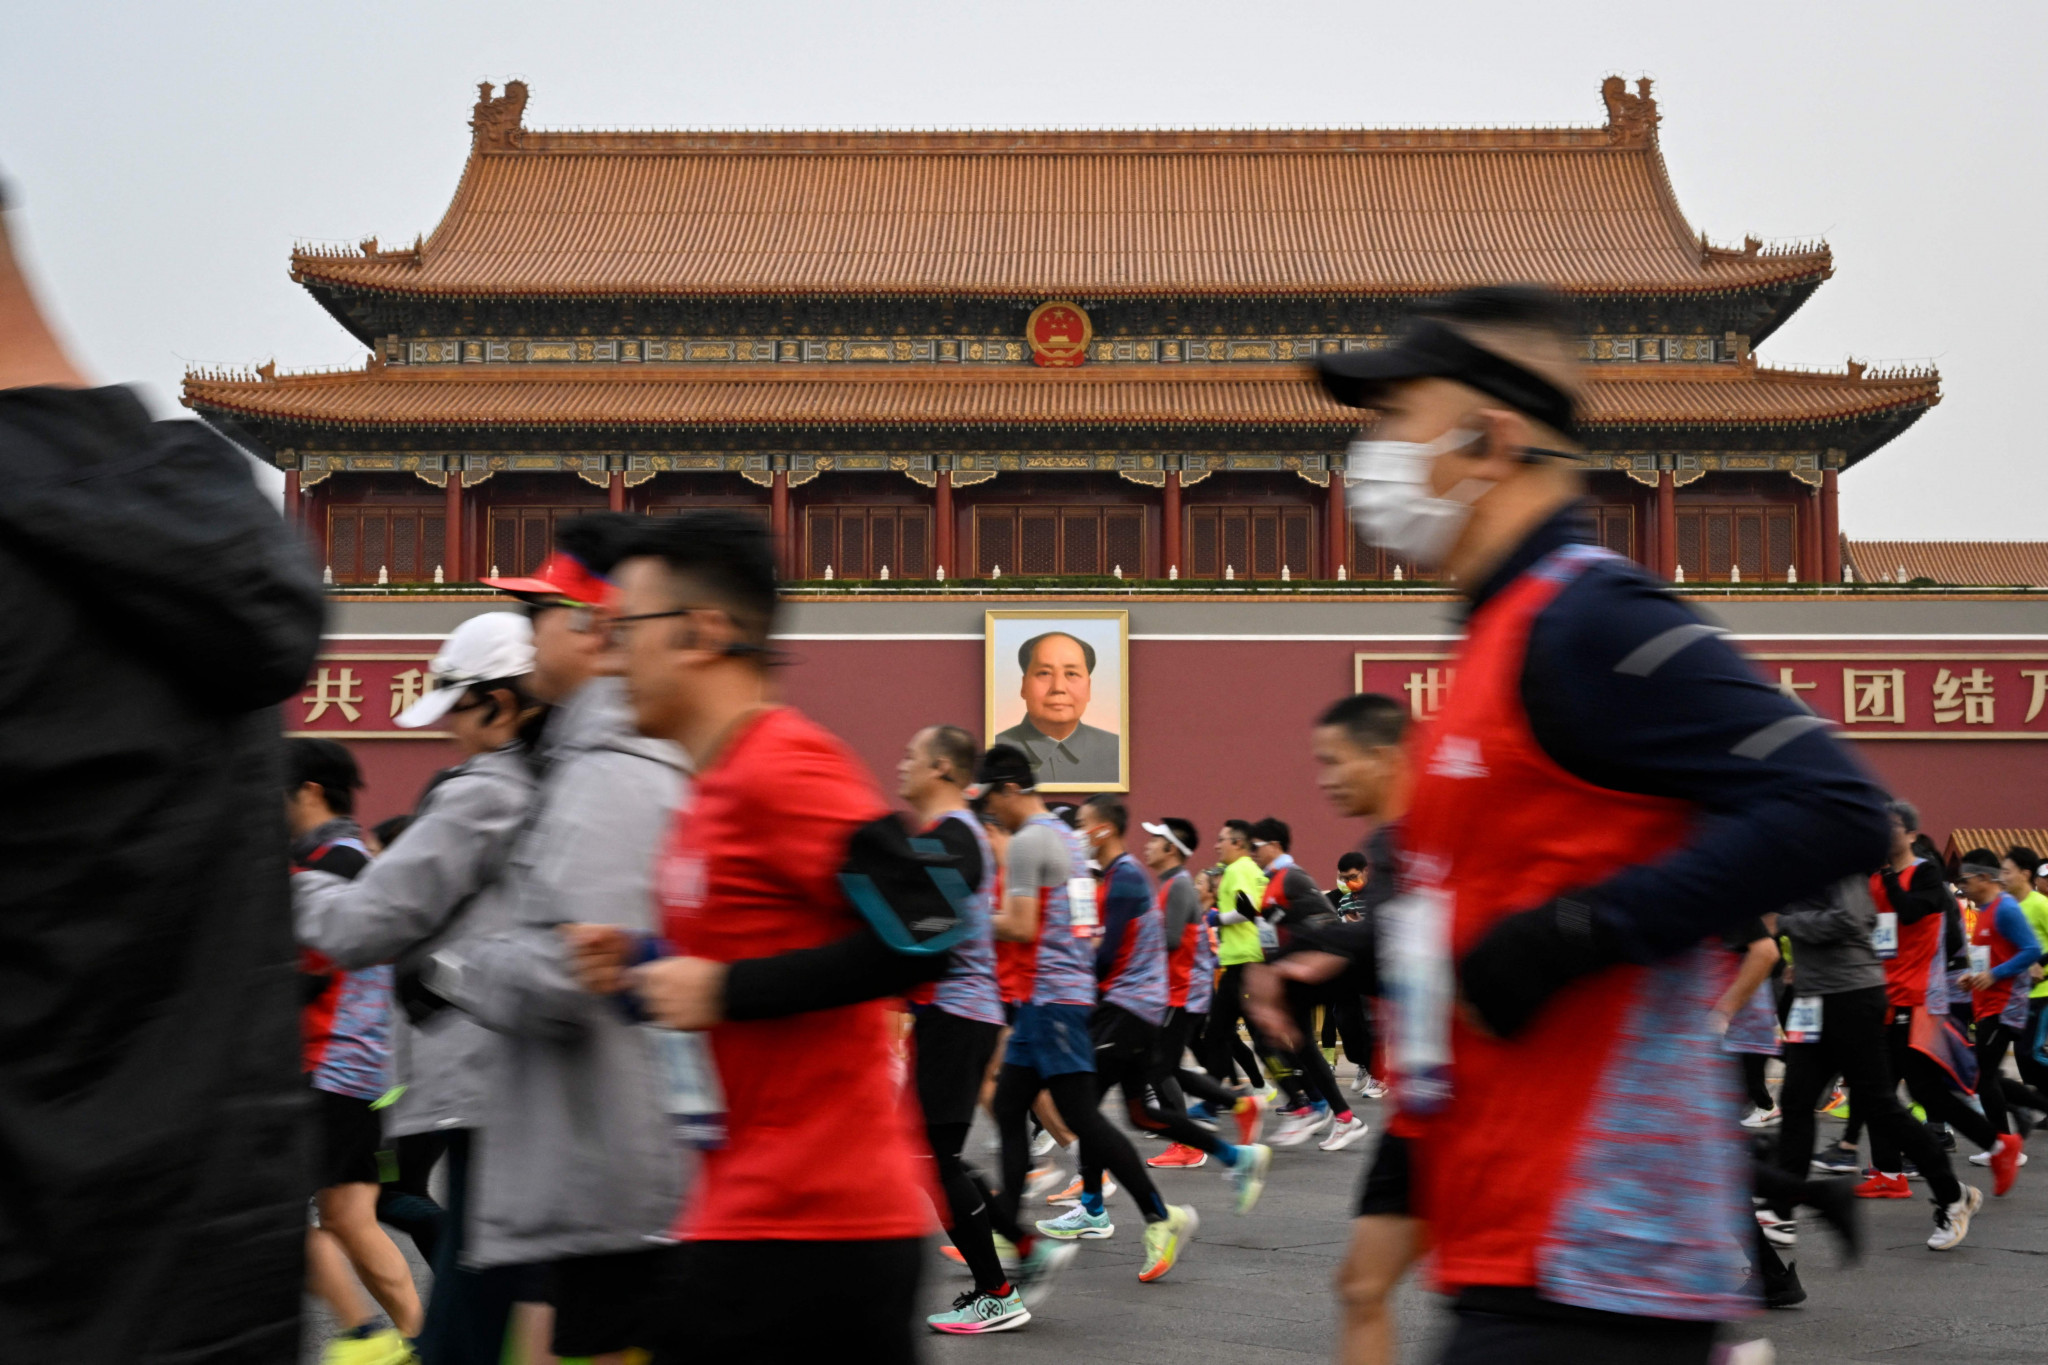 More than 30,000 runners took part in the Beijing Marathon, the biggest event in China since the Winter Olympic and Paralympic Games ©Getty Images